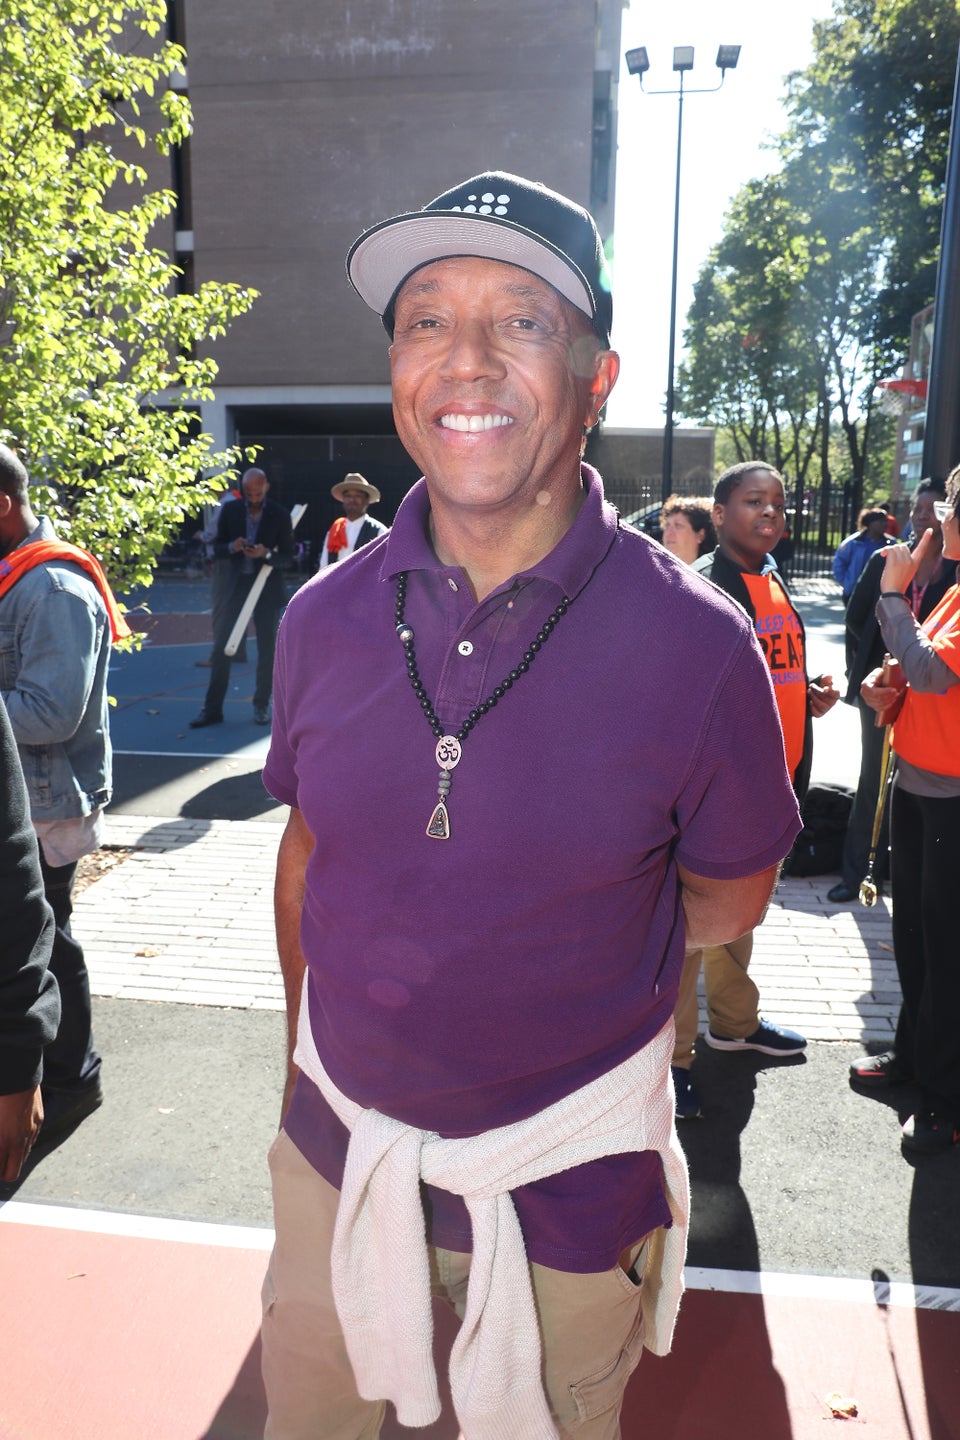 The Quick Read: HBO Cuts Ties With Russell Simmons Following Sexual Assault Allegations